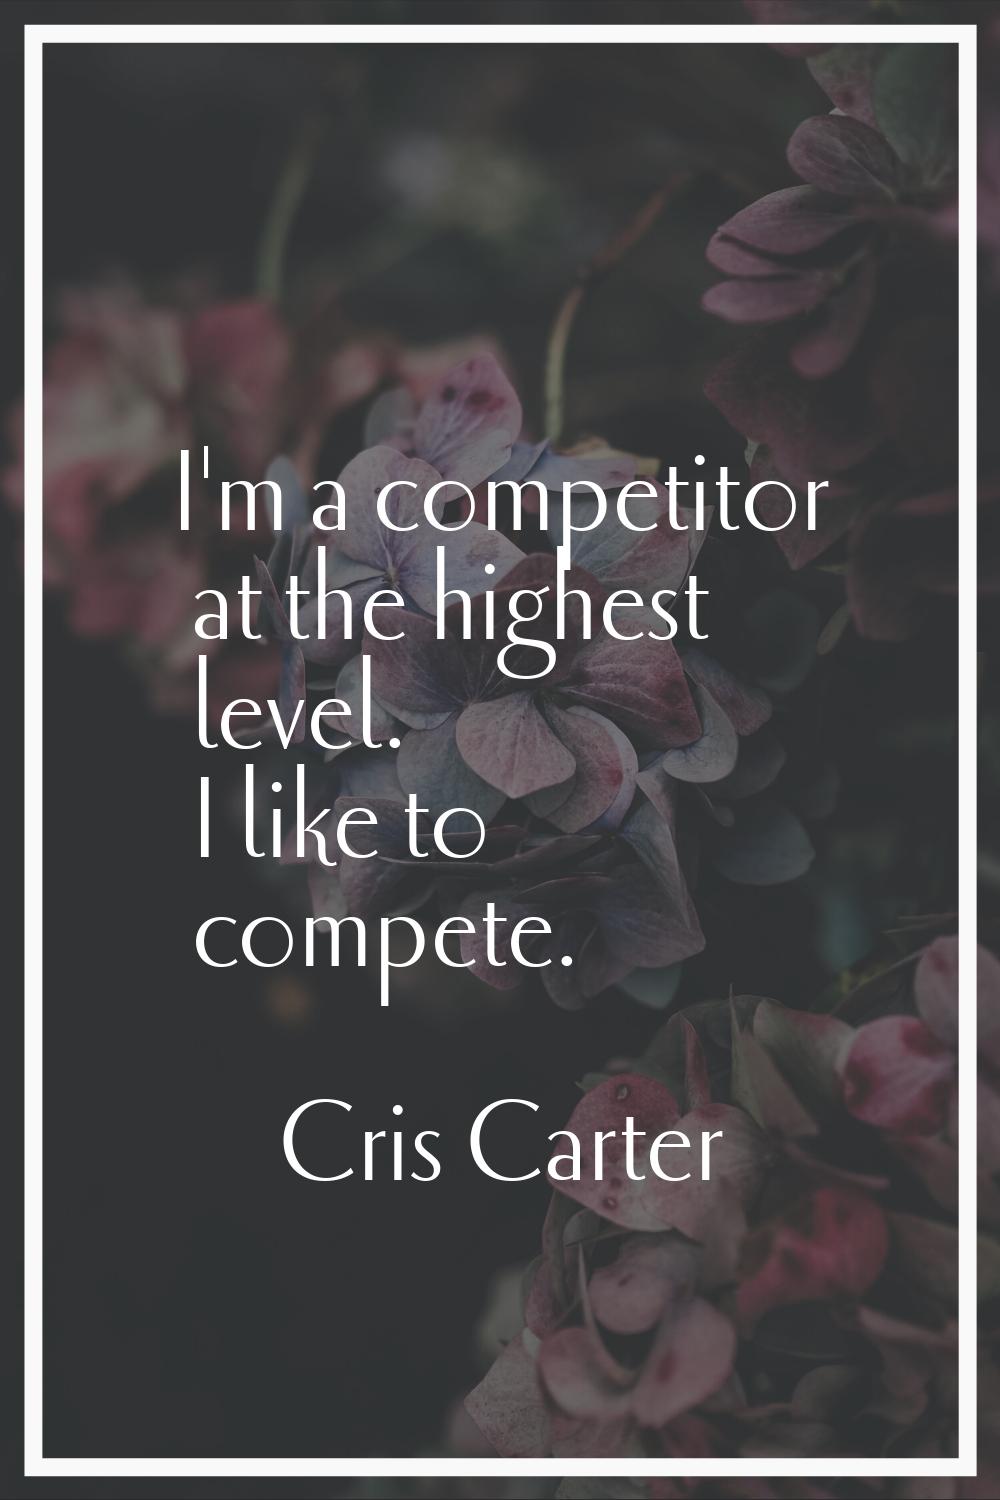 I'm a competitor at the highest level. I like to compete.